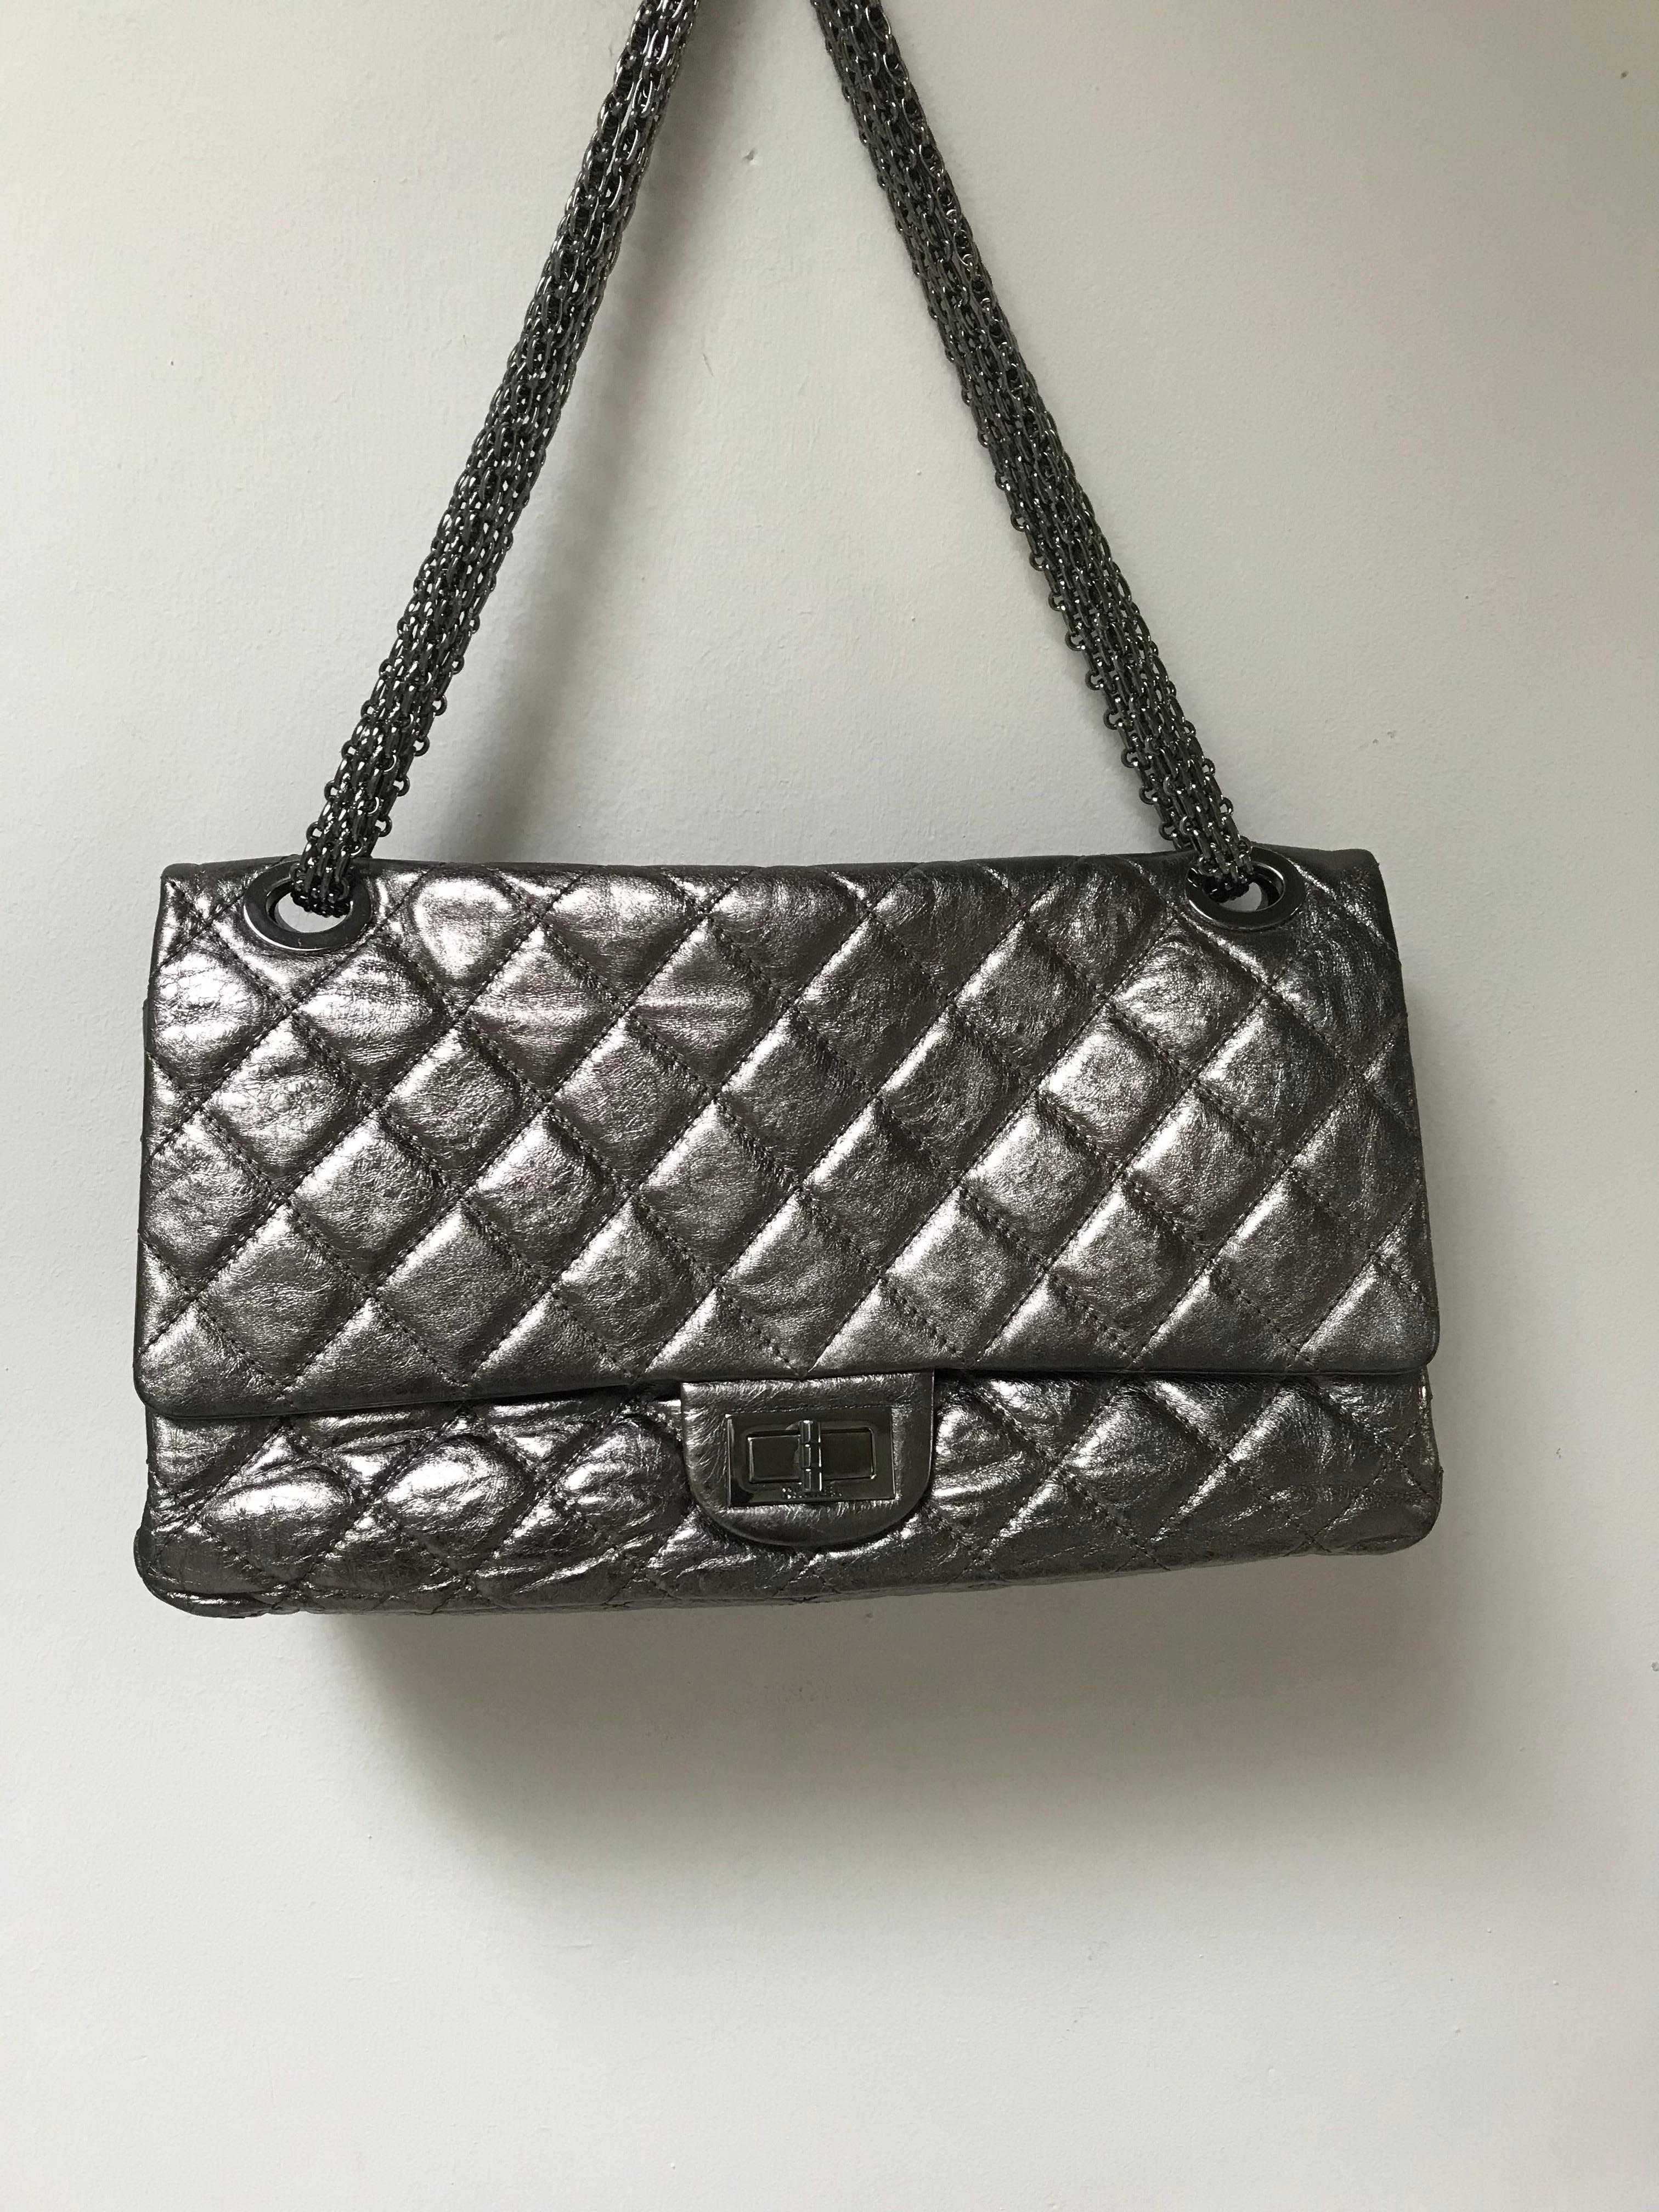 About
Limited edition maxi Reissure double flap Chanel bag  in silver metallic-distressed leather and with thick silver chains. Double chain 62 cm, long with one chain 100 cm.  
Measurements:
Length: 14 inches ( 35,5 cm)
Height:  8  inches ( 20